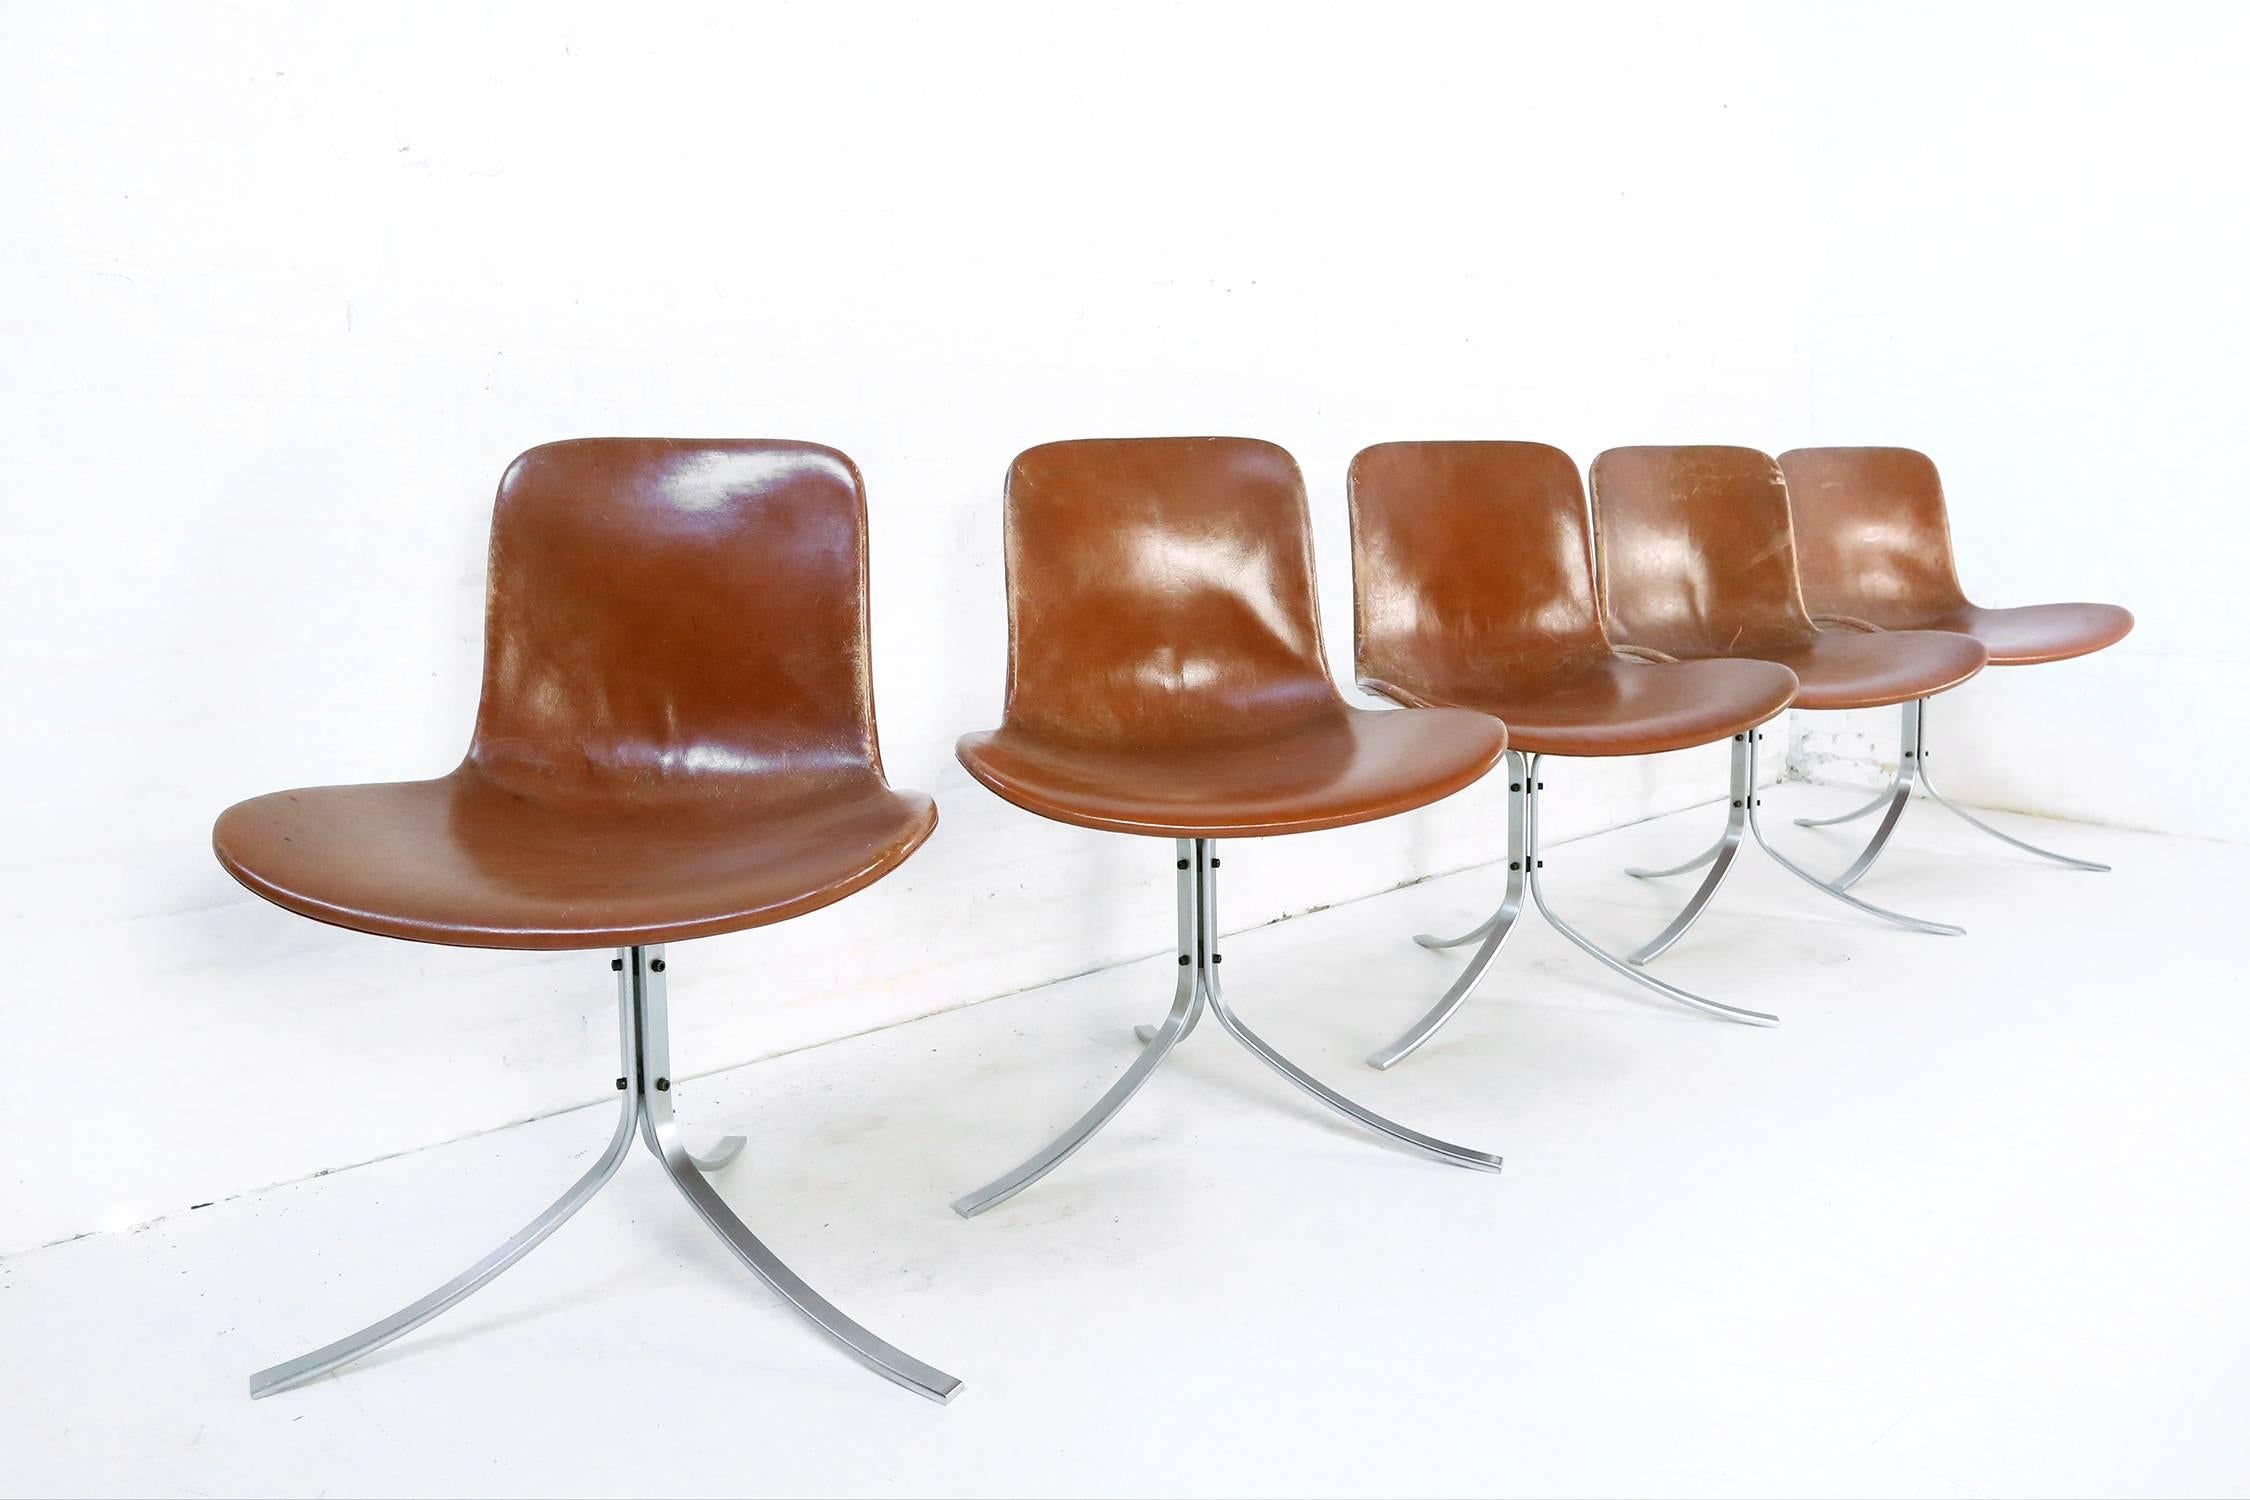 This iconic and first edition set of five PK-9 chairs was designed by Poul Kjaerholm and produced by E. Kold Christensen in the 1960s. The chairs feature their original patinated cognac leather upholstery. There is a maker's mark on the three curved